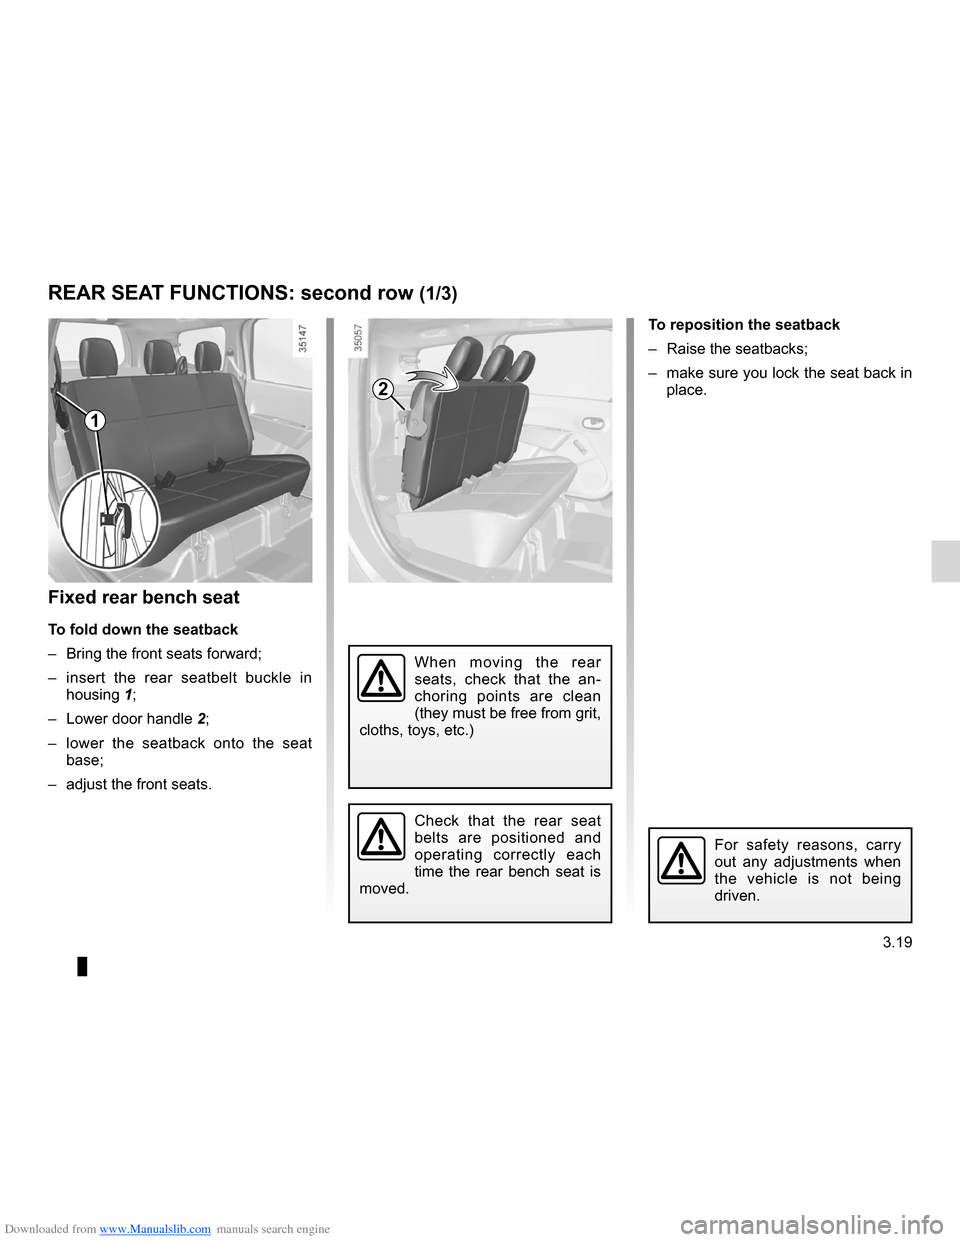 DACIA LODGY 2012 1.G Owners Manual Downloaded from www.Manualslib.com manuals search engine rear bench seat..................................... (up to the end of the DU)
rear seats functions  ......................................... 